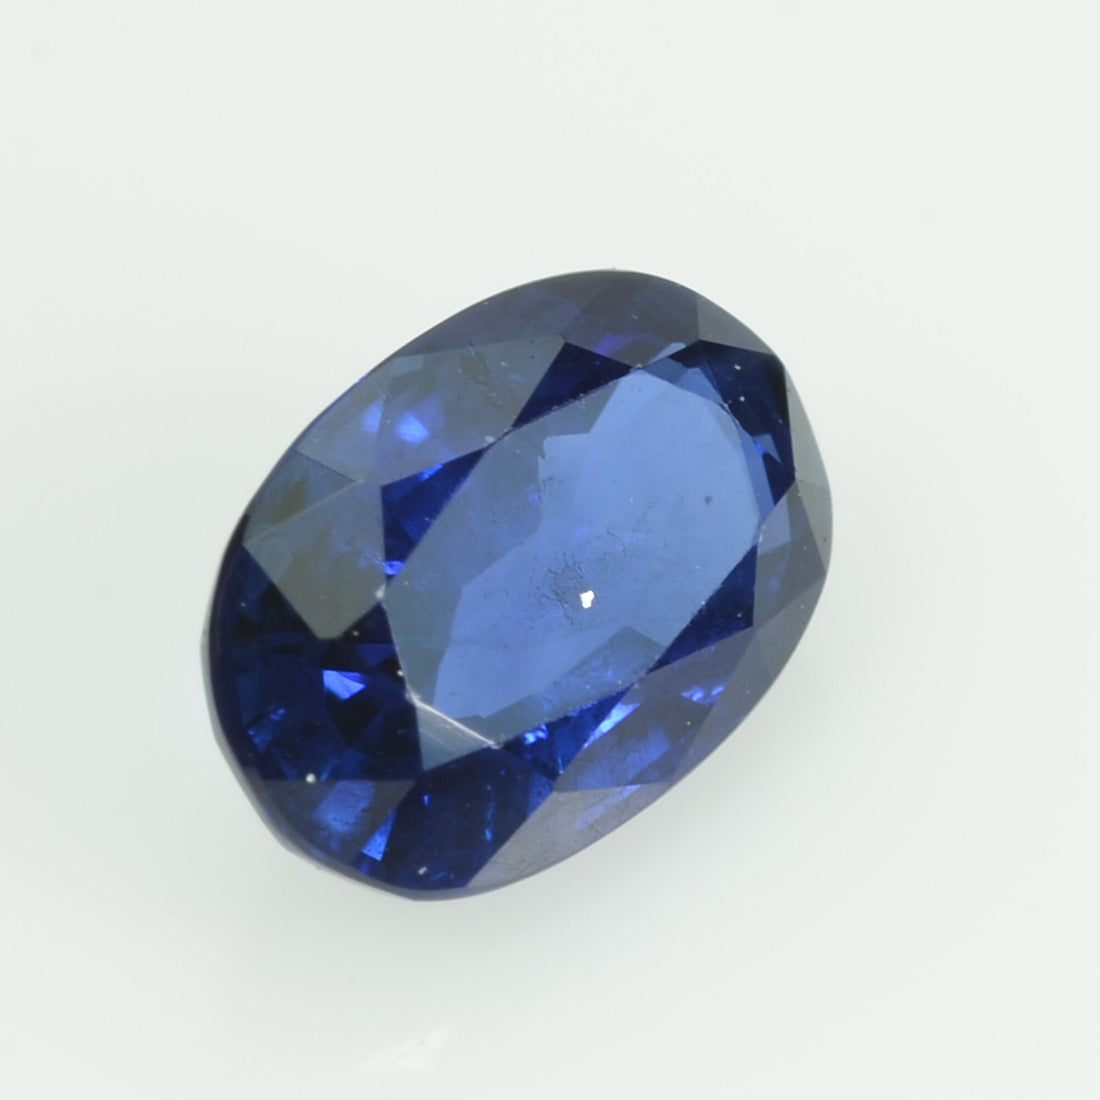 0.95 cts natural blue sapphire loose gemstone oval cut AGL Certified